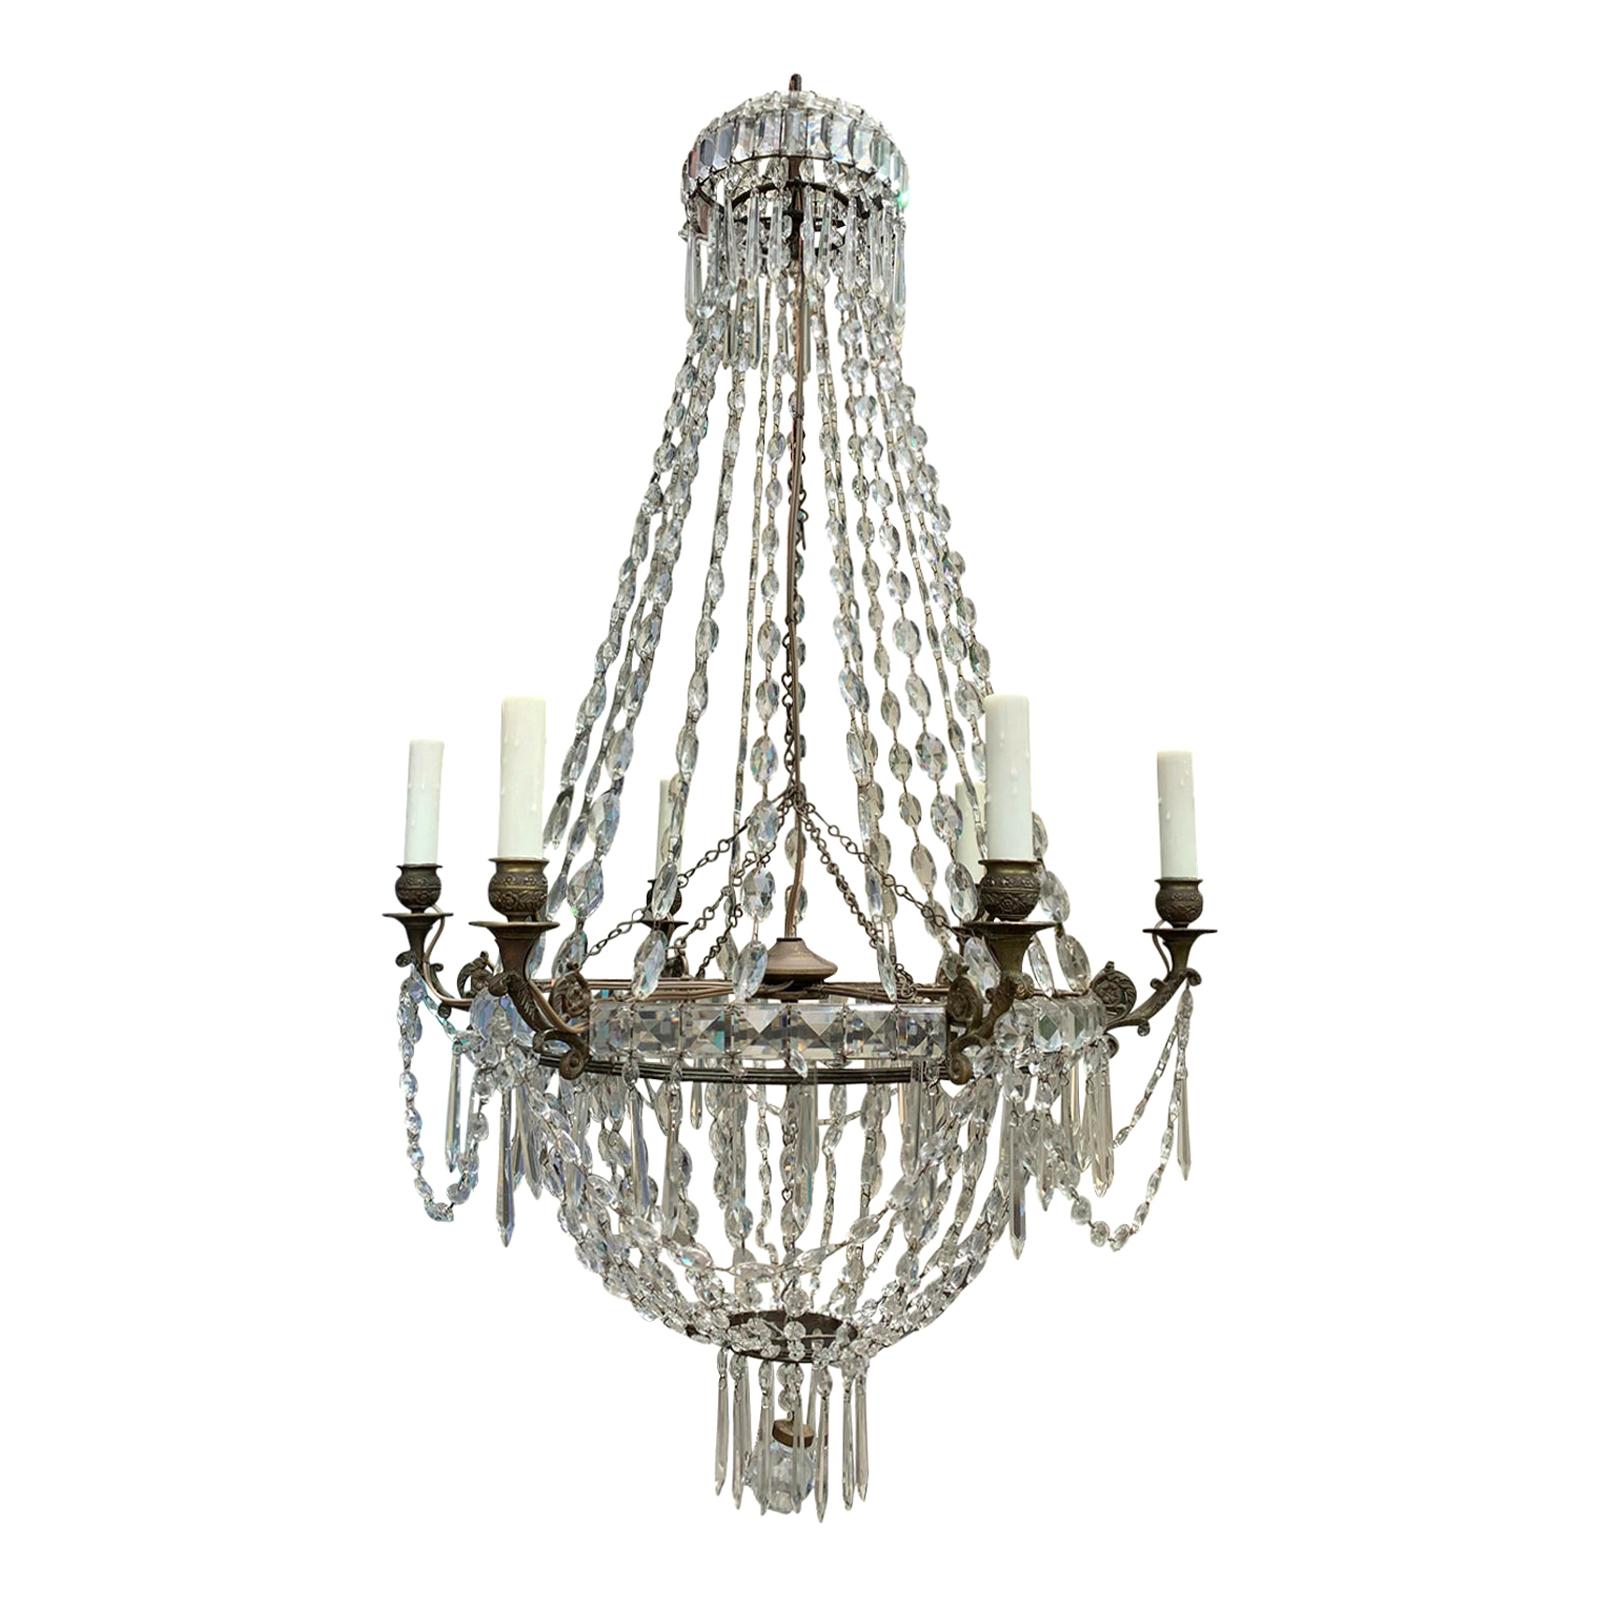 19th Century Neoclassical Bronze and Crystal Six-Arm Chandelier